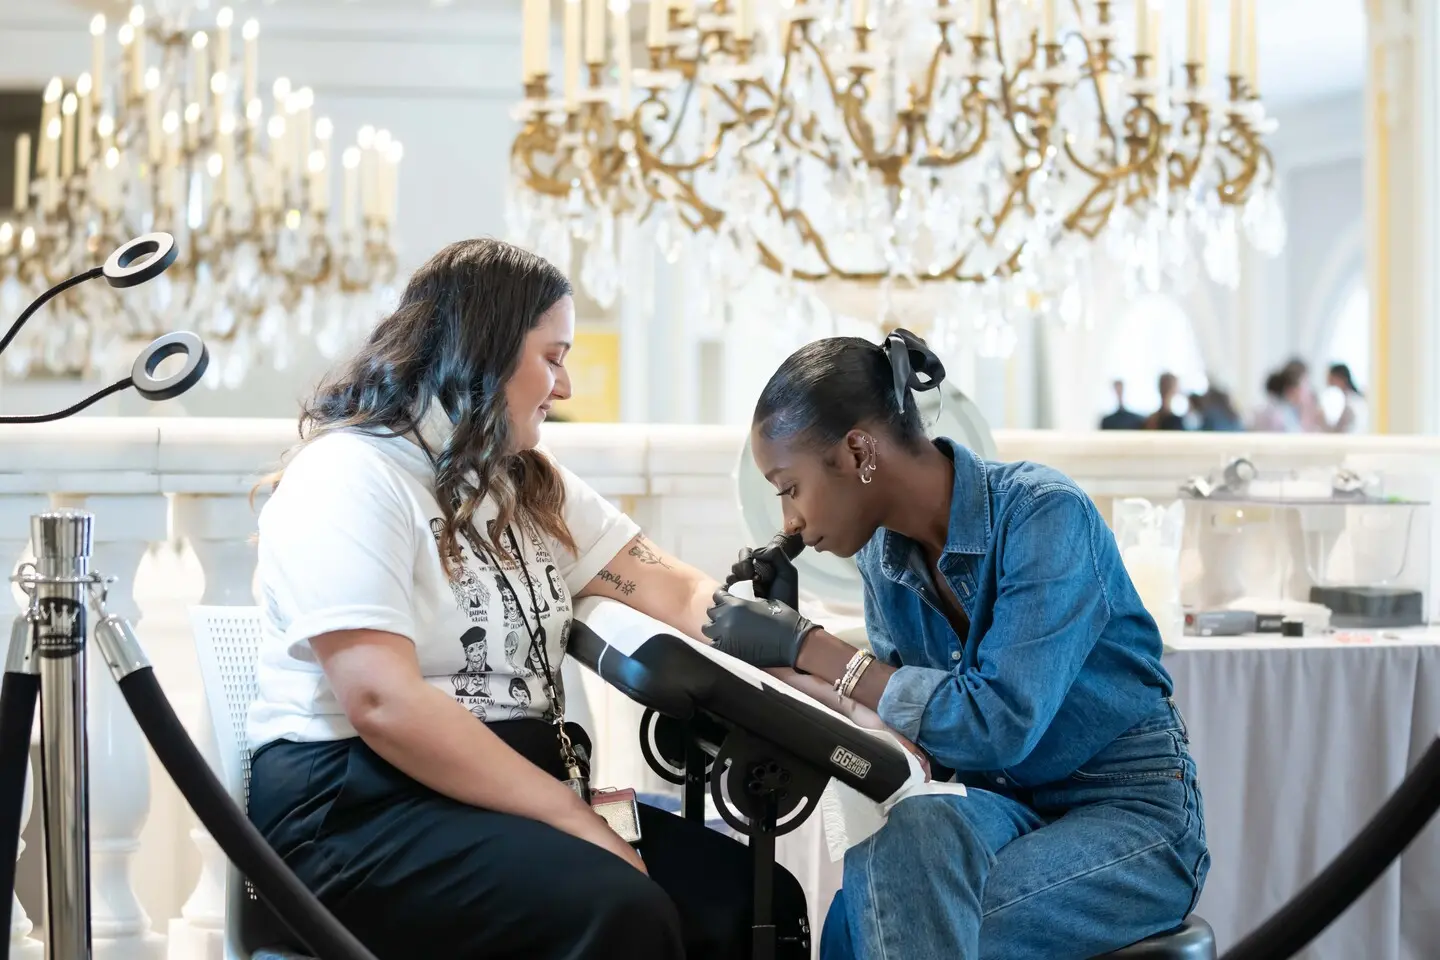 A woman with a medium skin tone and wavy, brunette hair is getting a tattoo. The tattoo artist has a dark skin tone and is wearing an all-denim outfit. They are seated in front of a baroque balustrade and a golden chandelier.